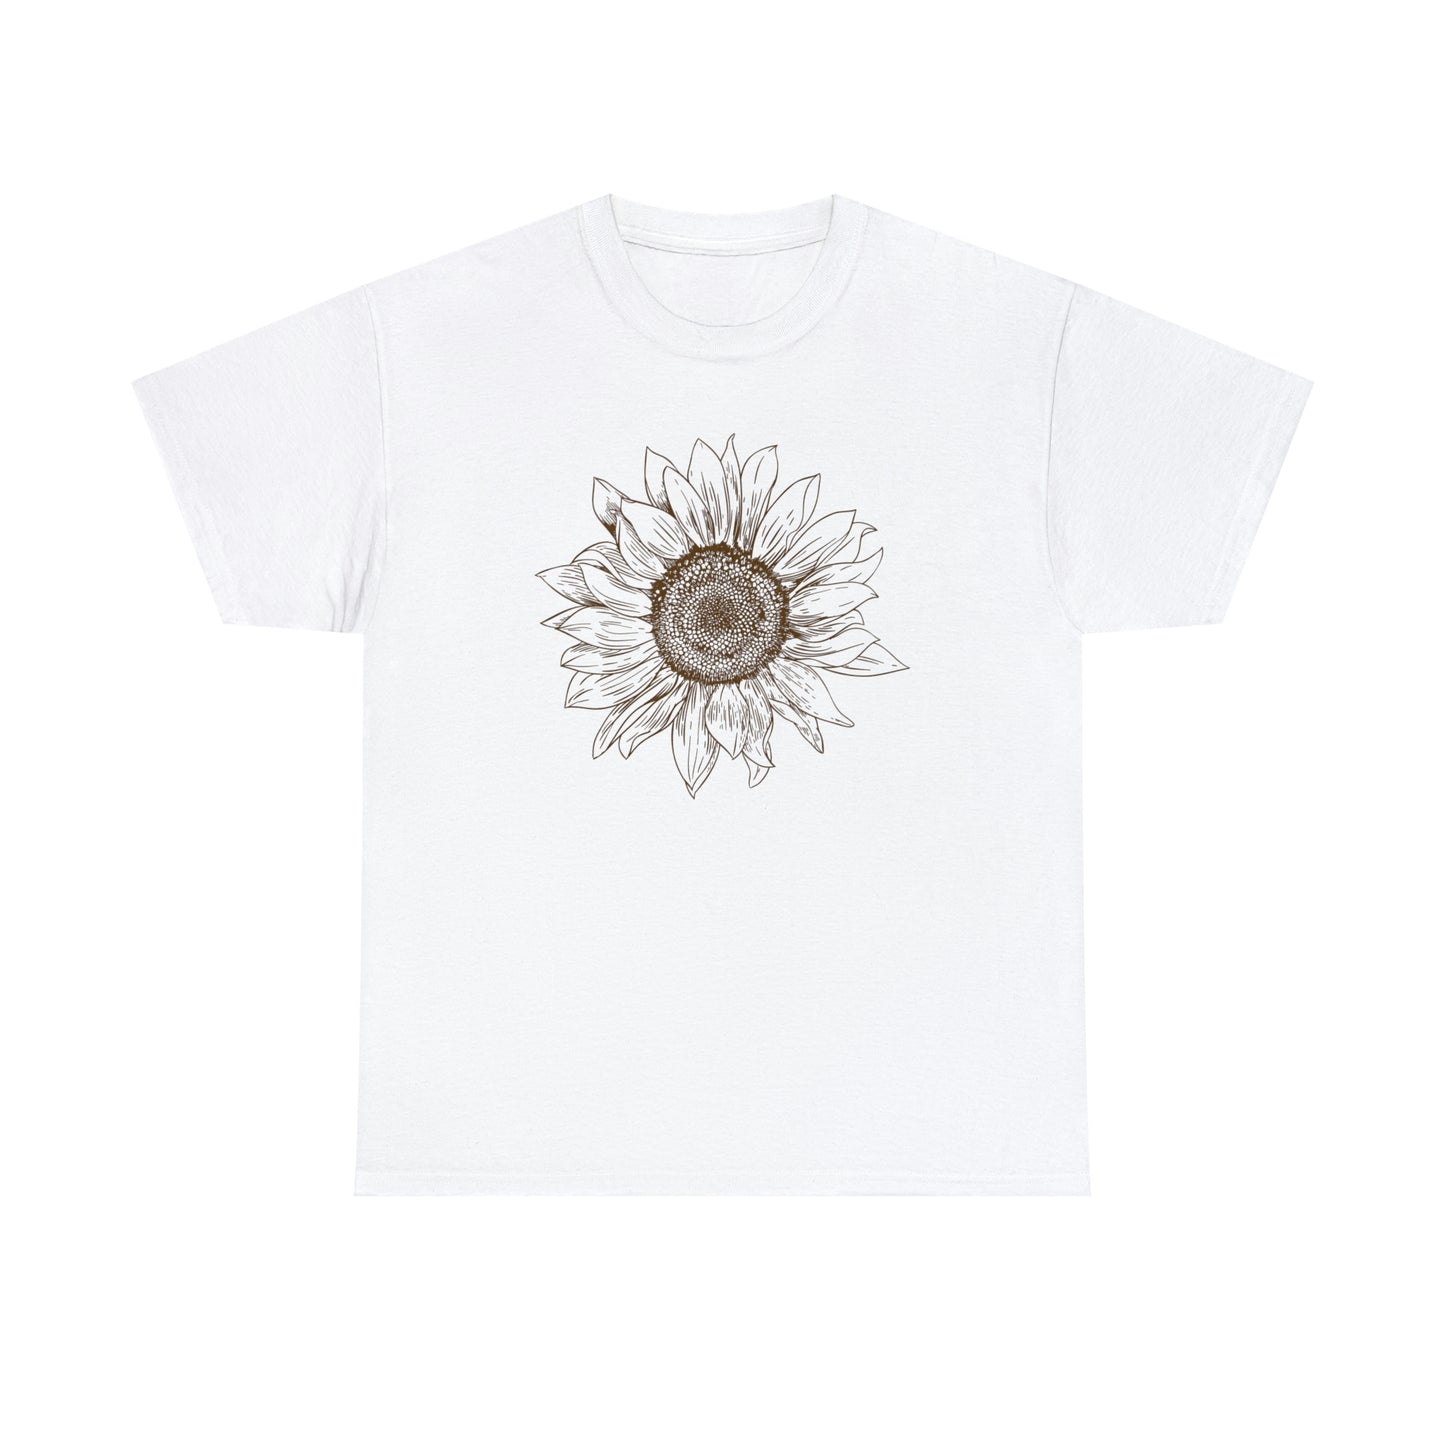 Sunflower T-Shirt With Floral Print TShirt With Flower T Shirt For Gardener Shirt For Fall Flower T-Shirt For Minimalist